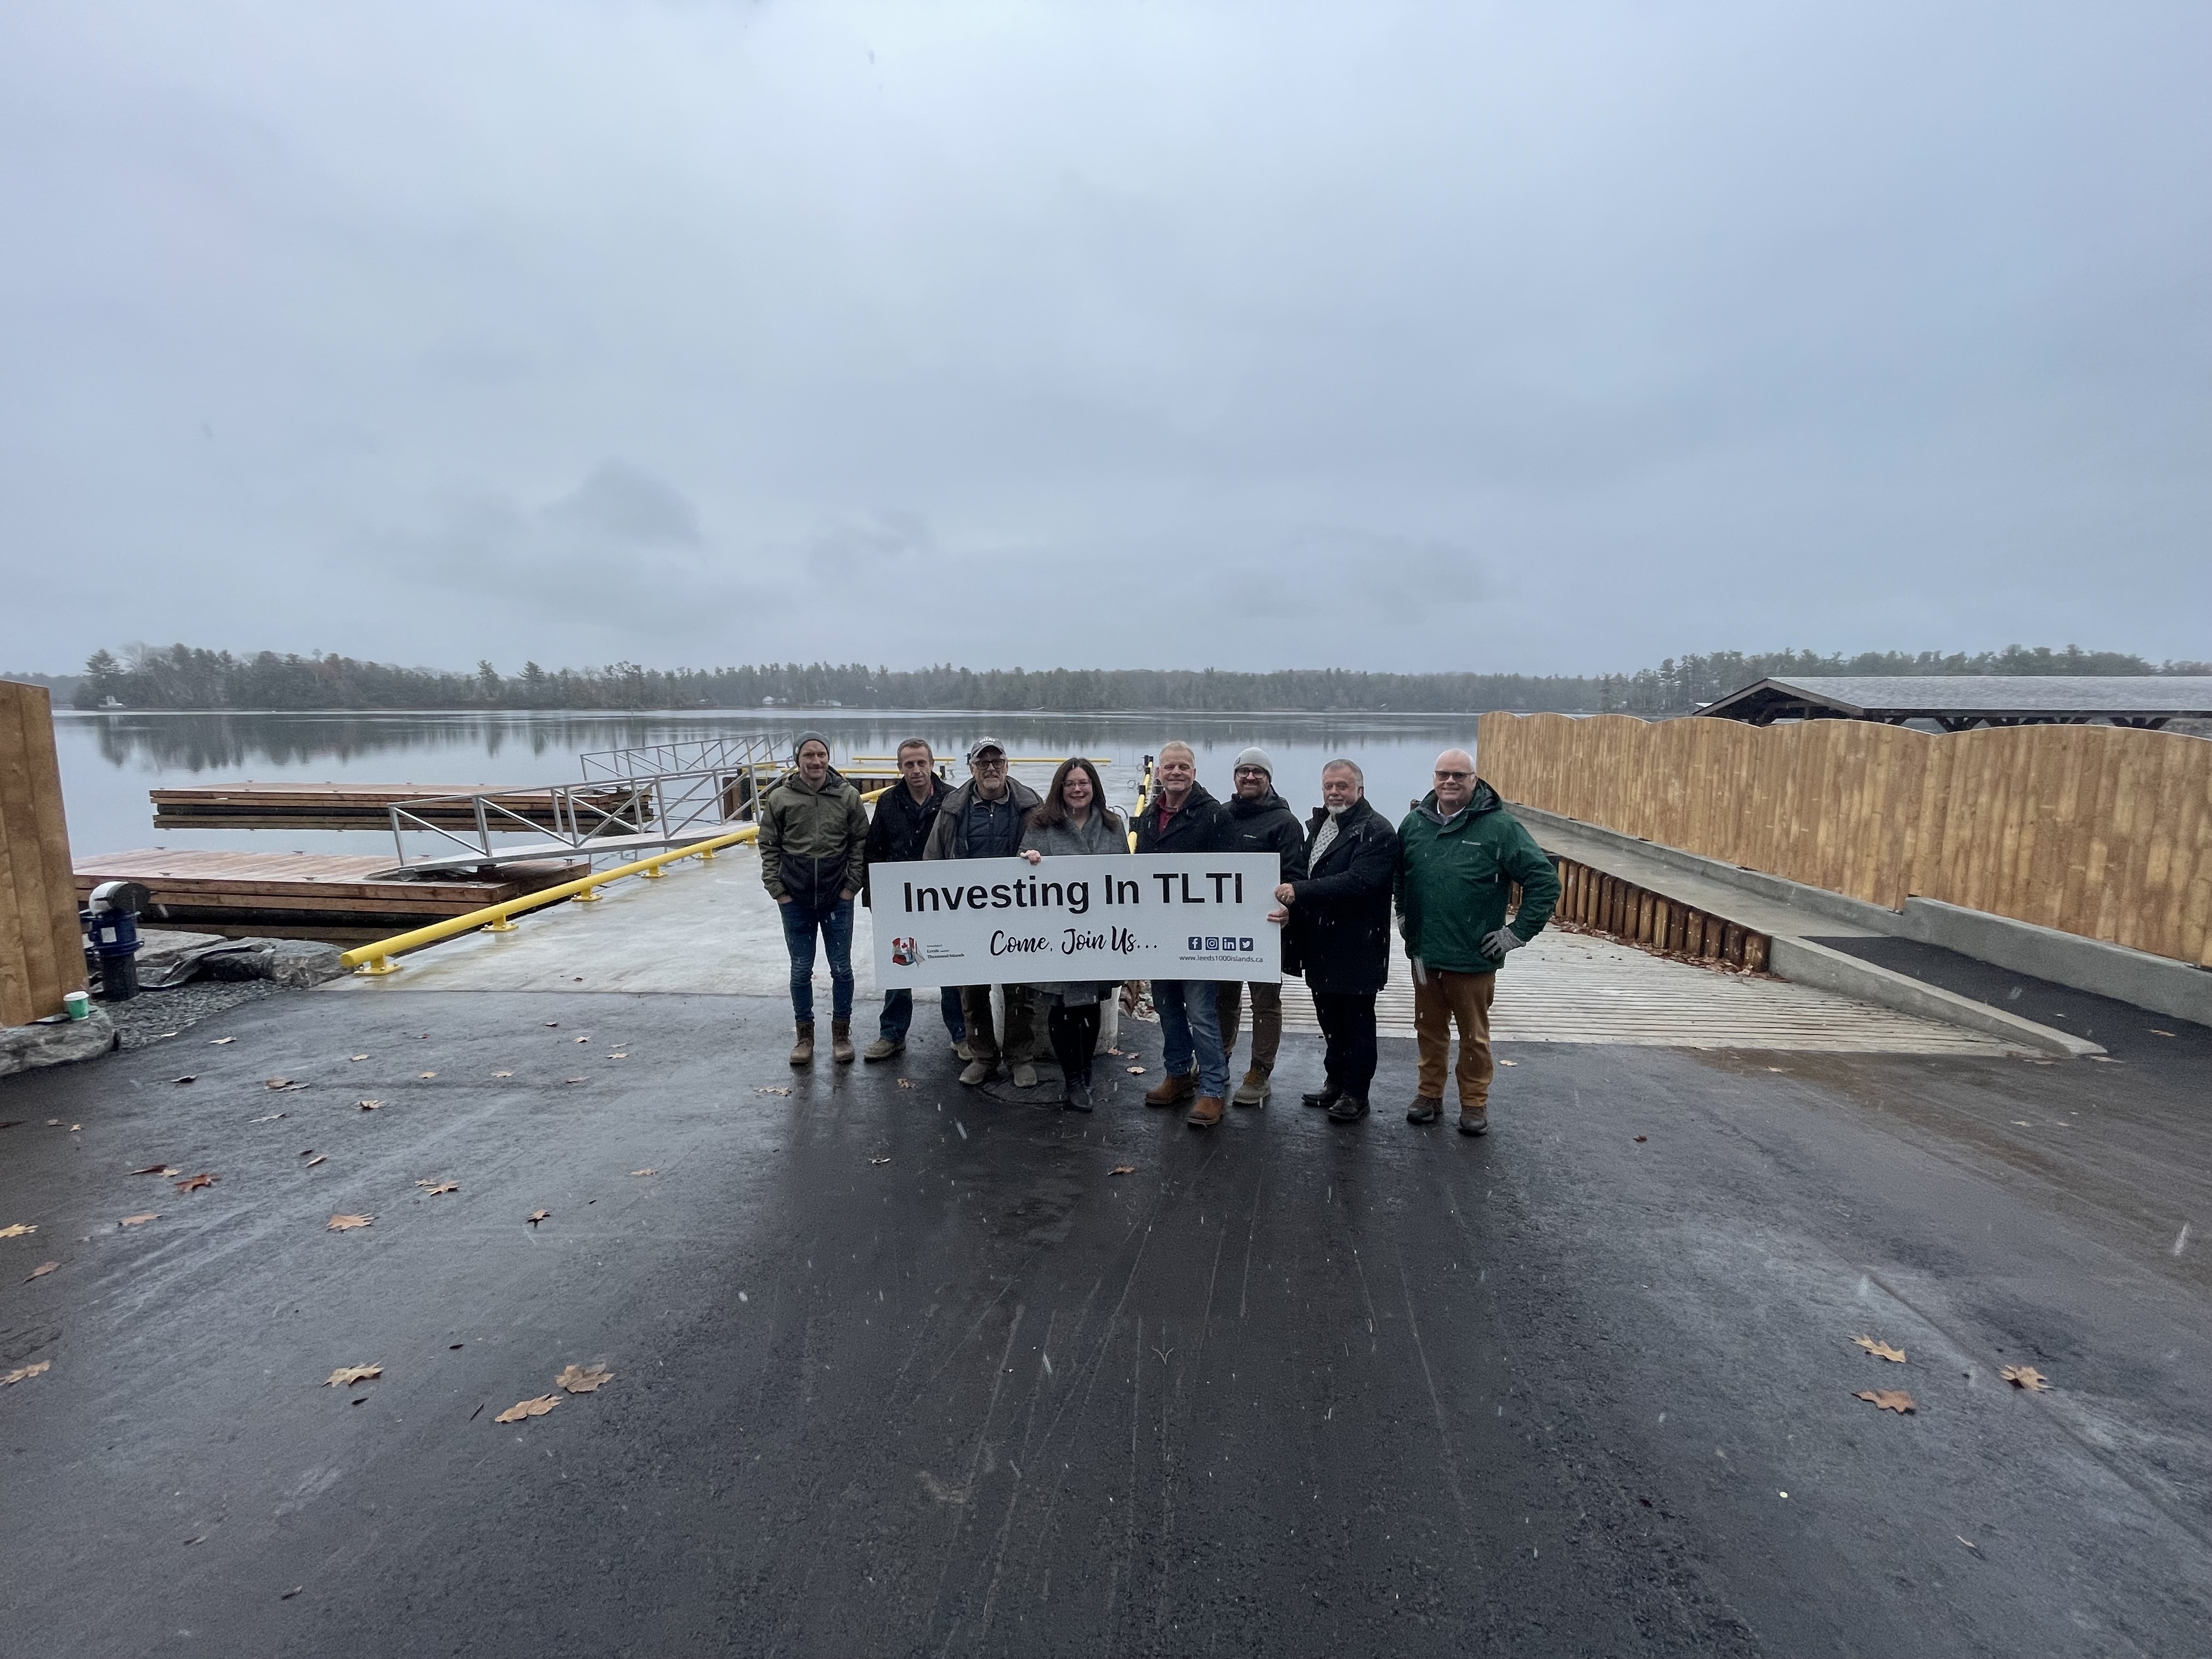 People standing on a wharf holding a sign that says TLTI investing in the future